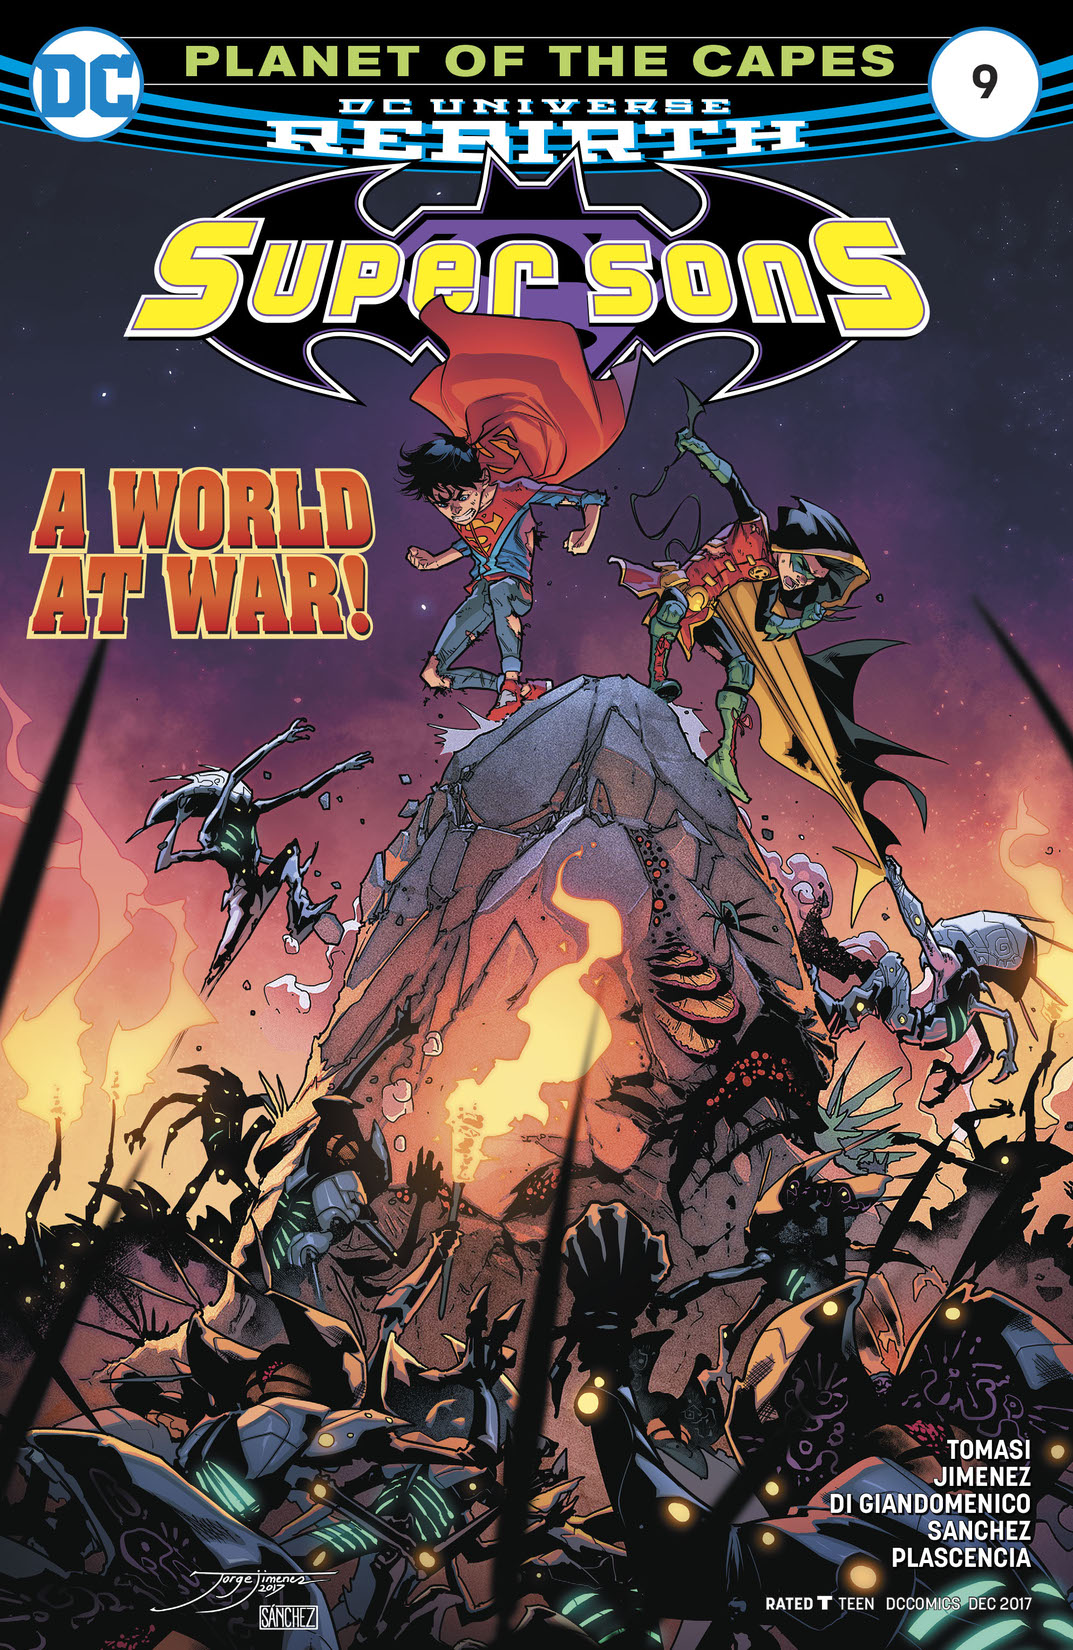 Super Sons (2017-) #9 preview images